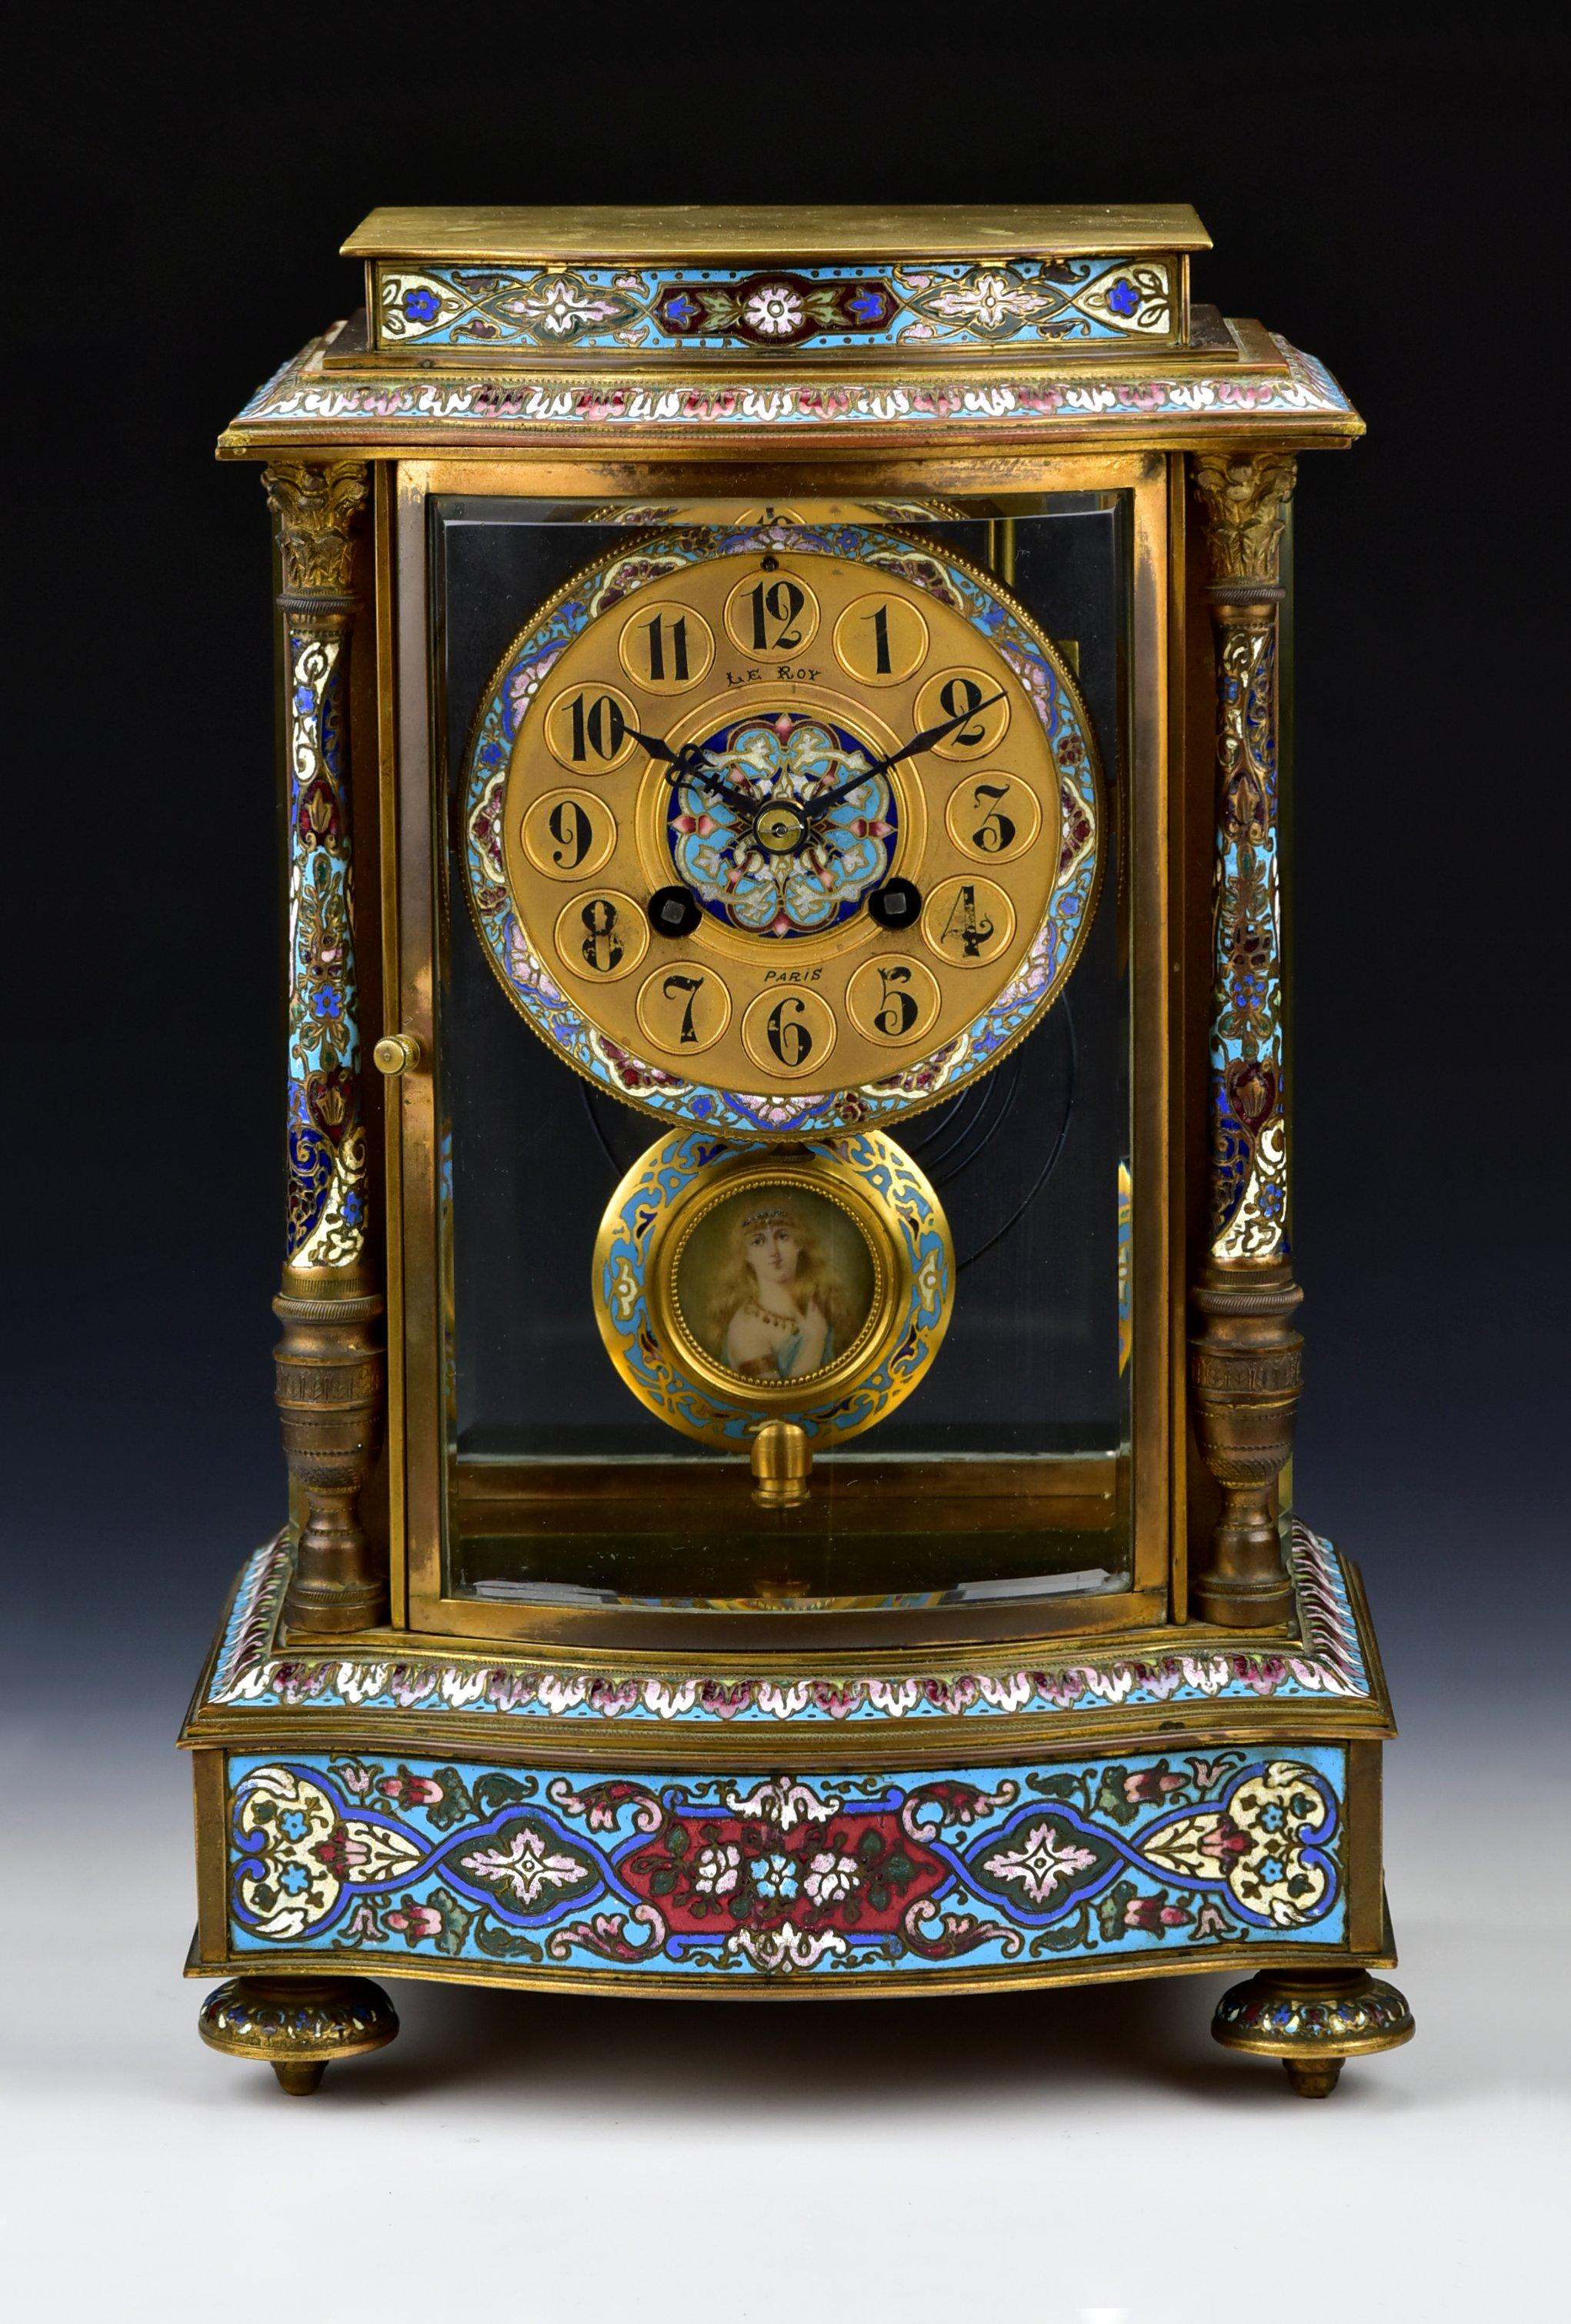 French Champleve mantel clock, gilt bronze body, bowed glass door, champleve decor, and hand painted miniature painting on the pendulum. It runs and chimes once on the half hour and chimes the hour. Marked Le Roy on the dial and Made in France on